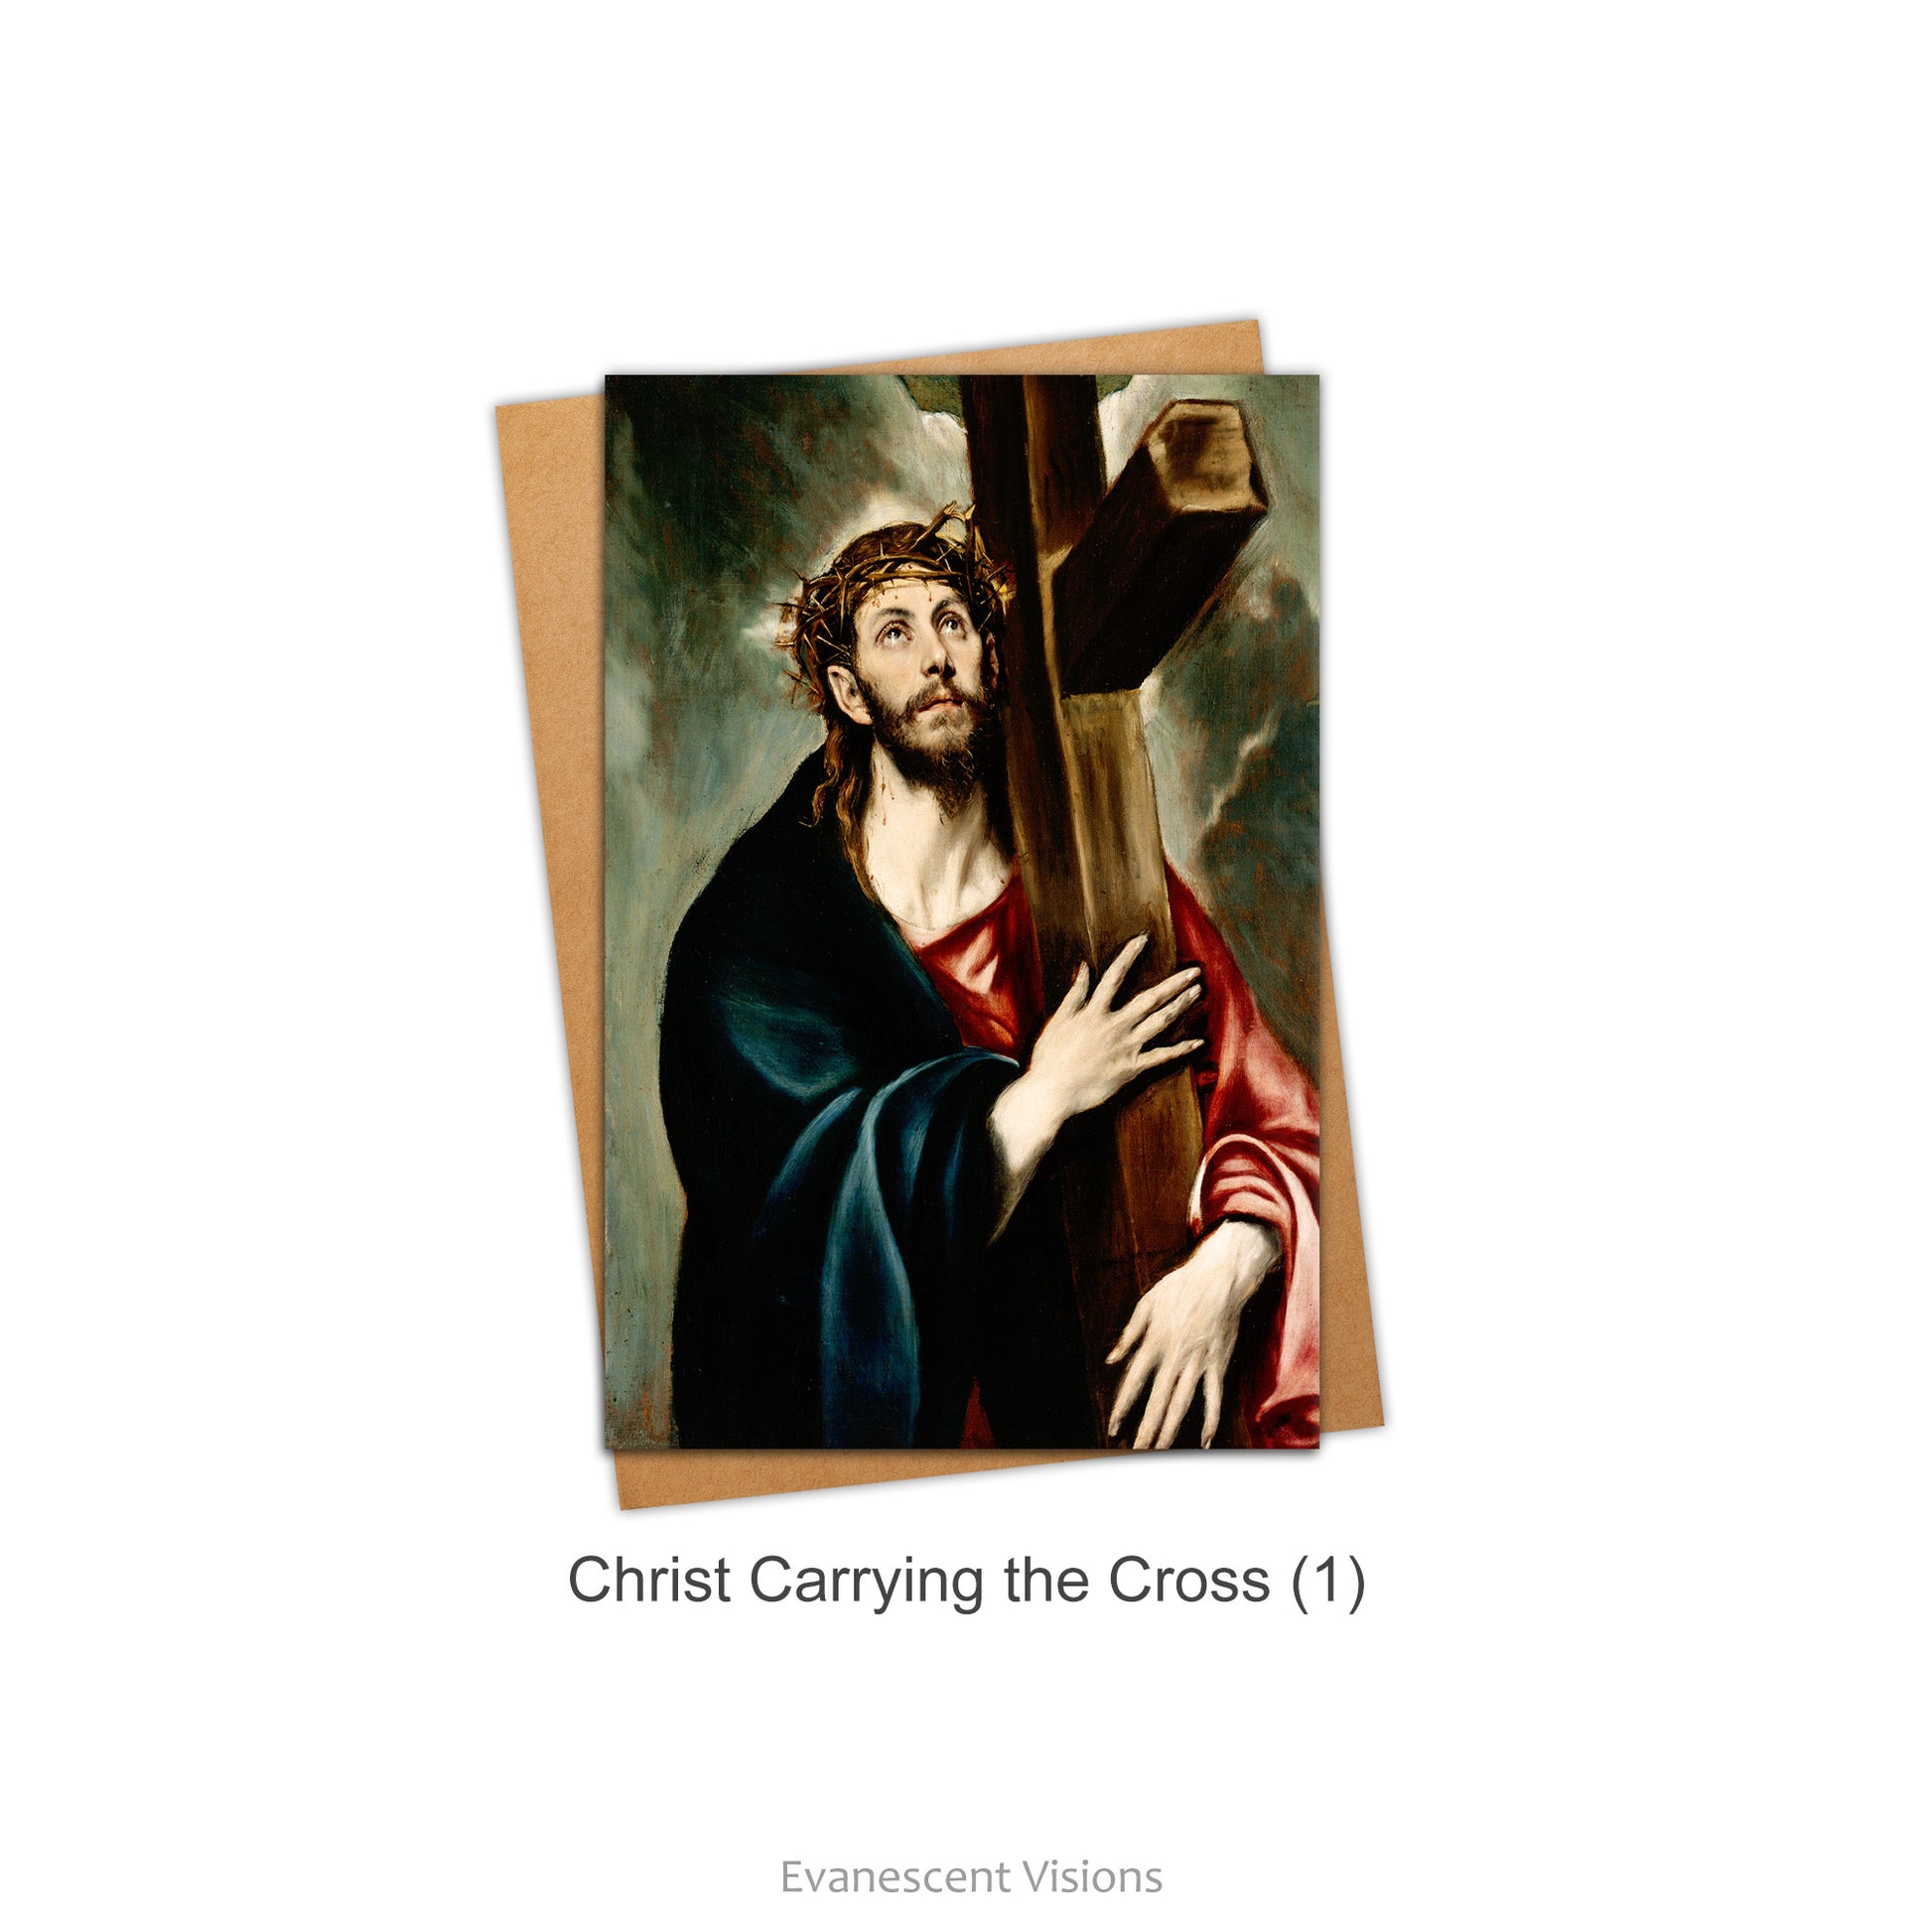 Design Option 1. Card with envelope. Card has image from the painting 'Christ Carrying the Cross' by El Greco.